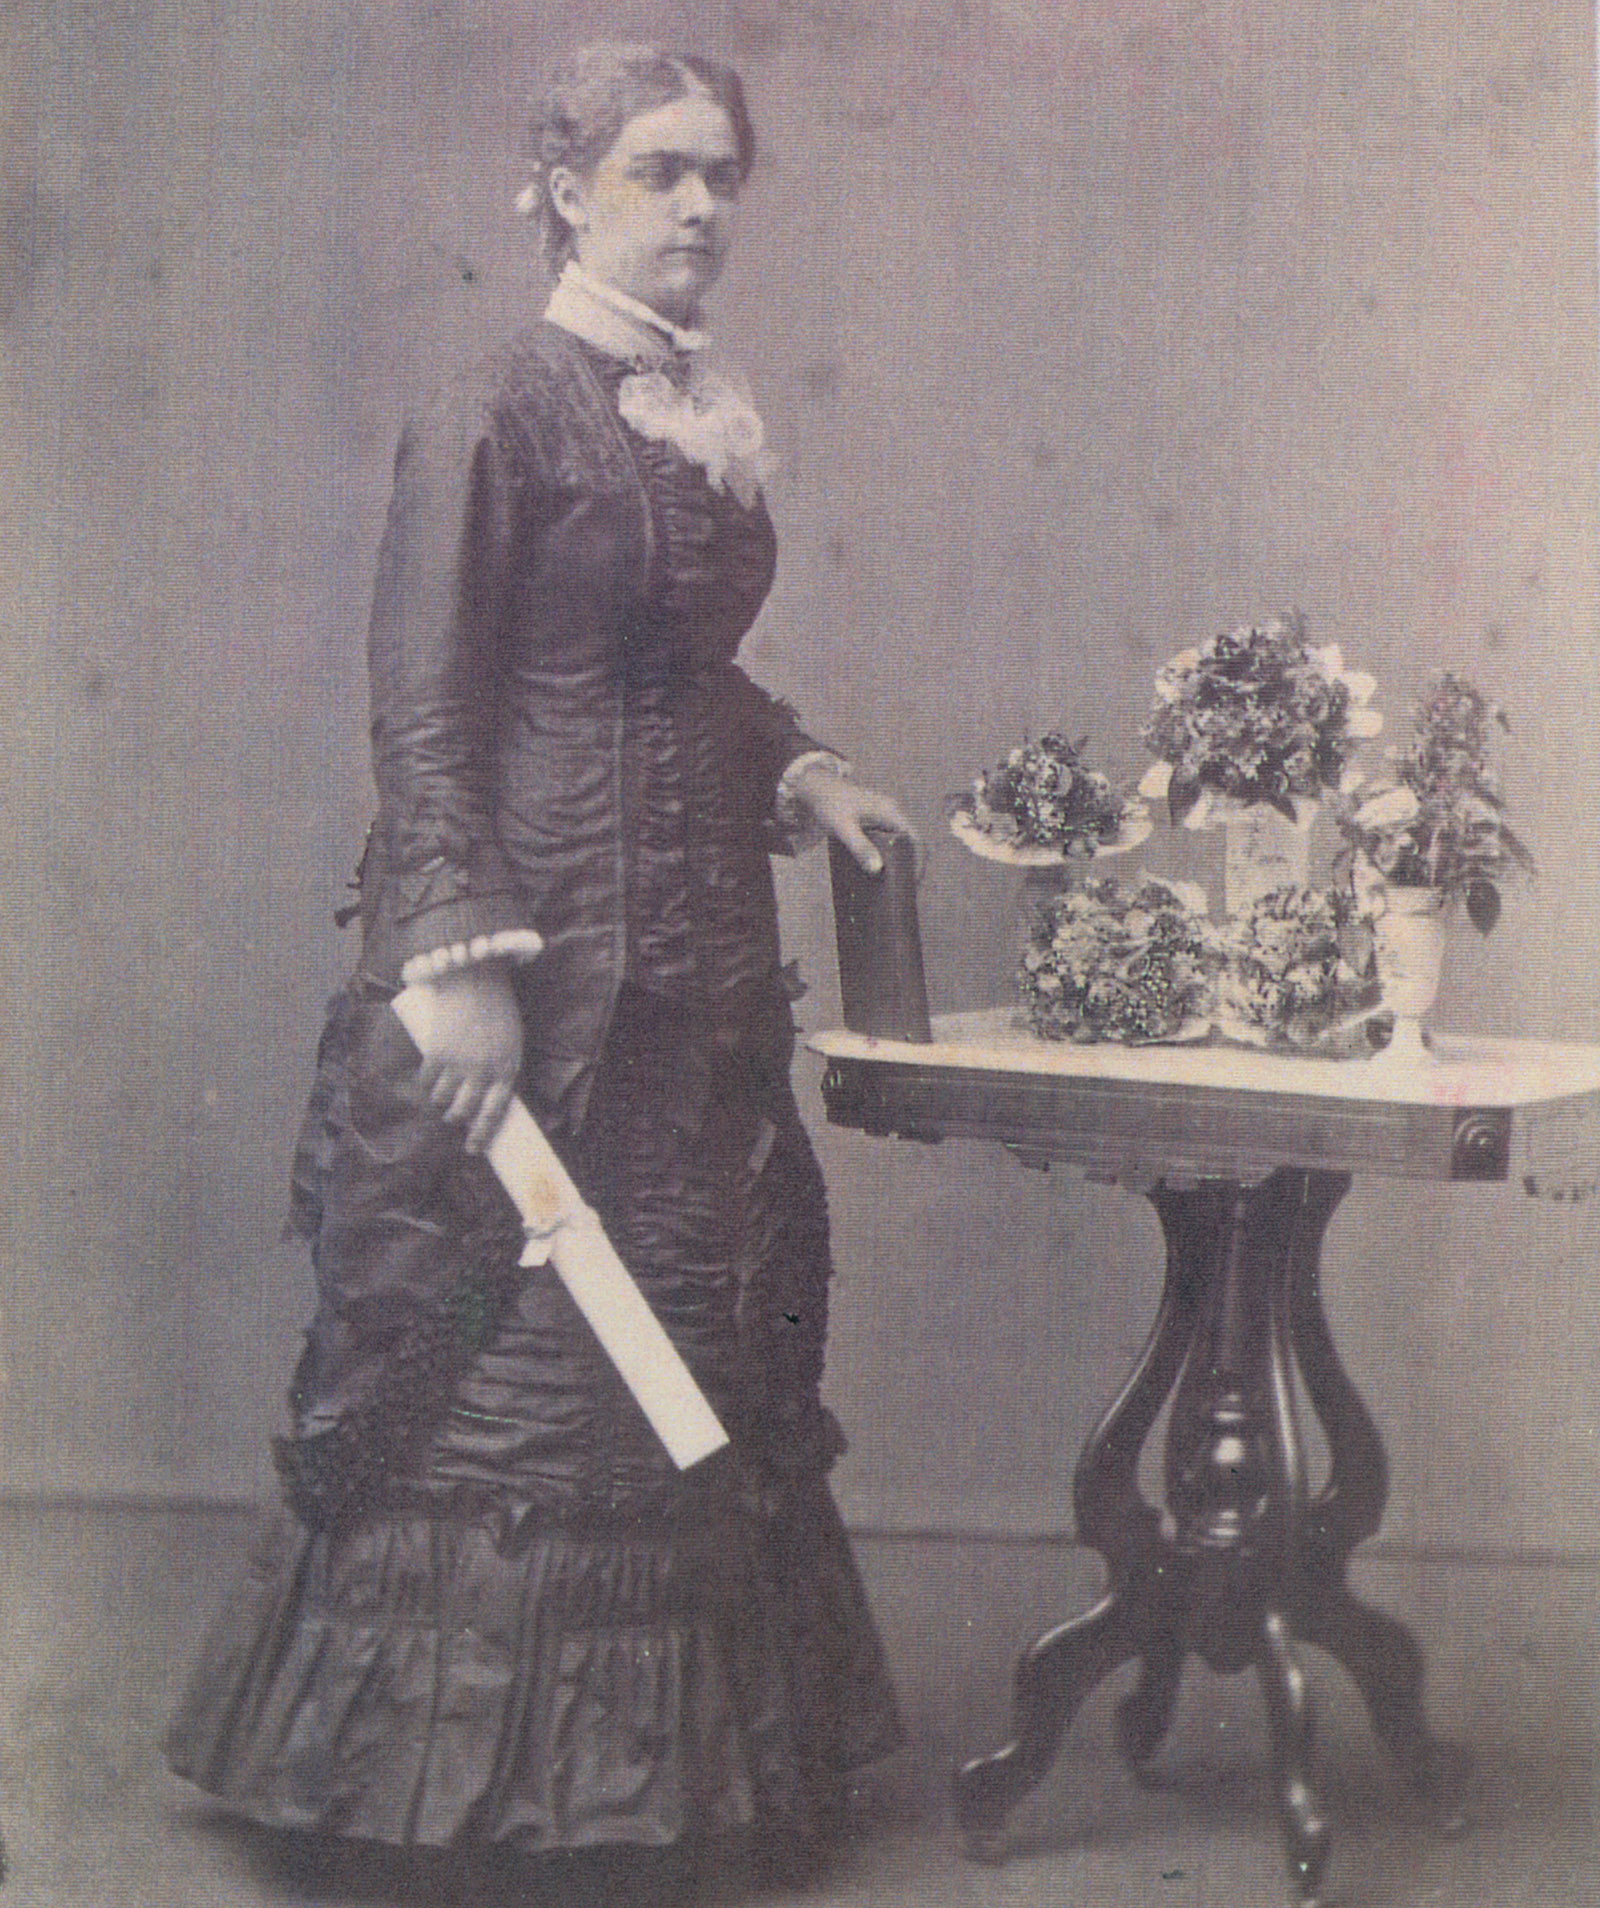 Sarah Locke poses in her graduation photograph, May 21, 1880. The dress worn in the photograph is also in the Sarah Locke Smith 